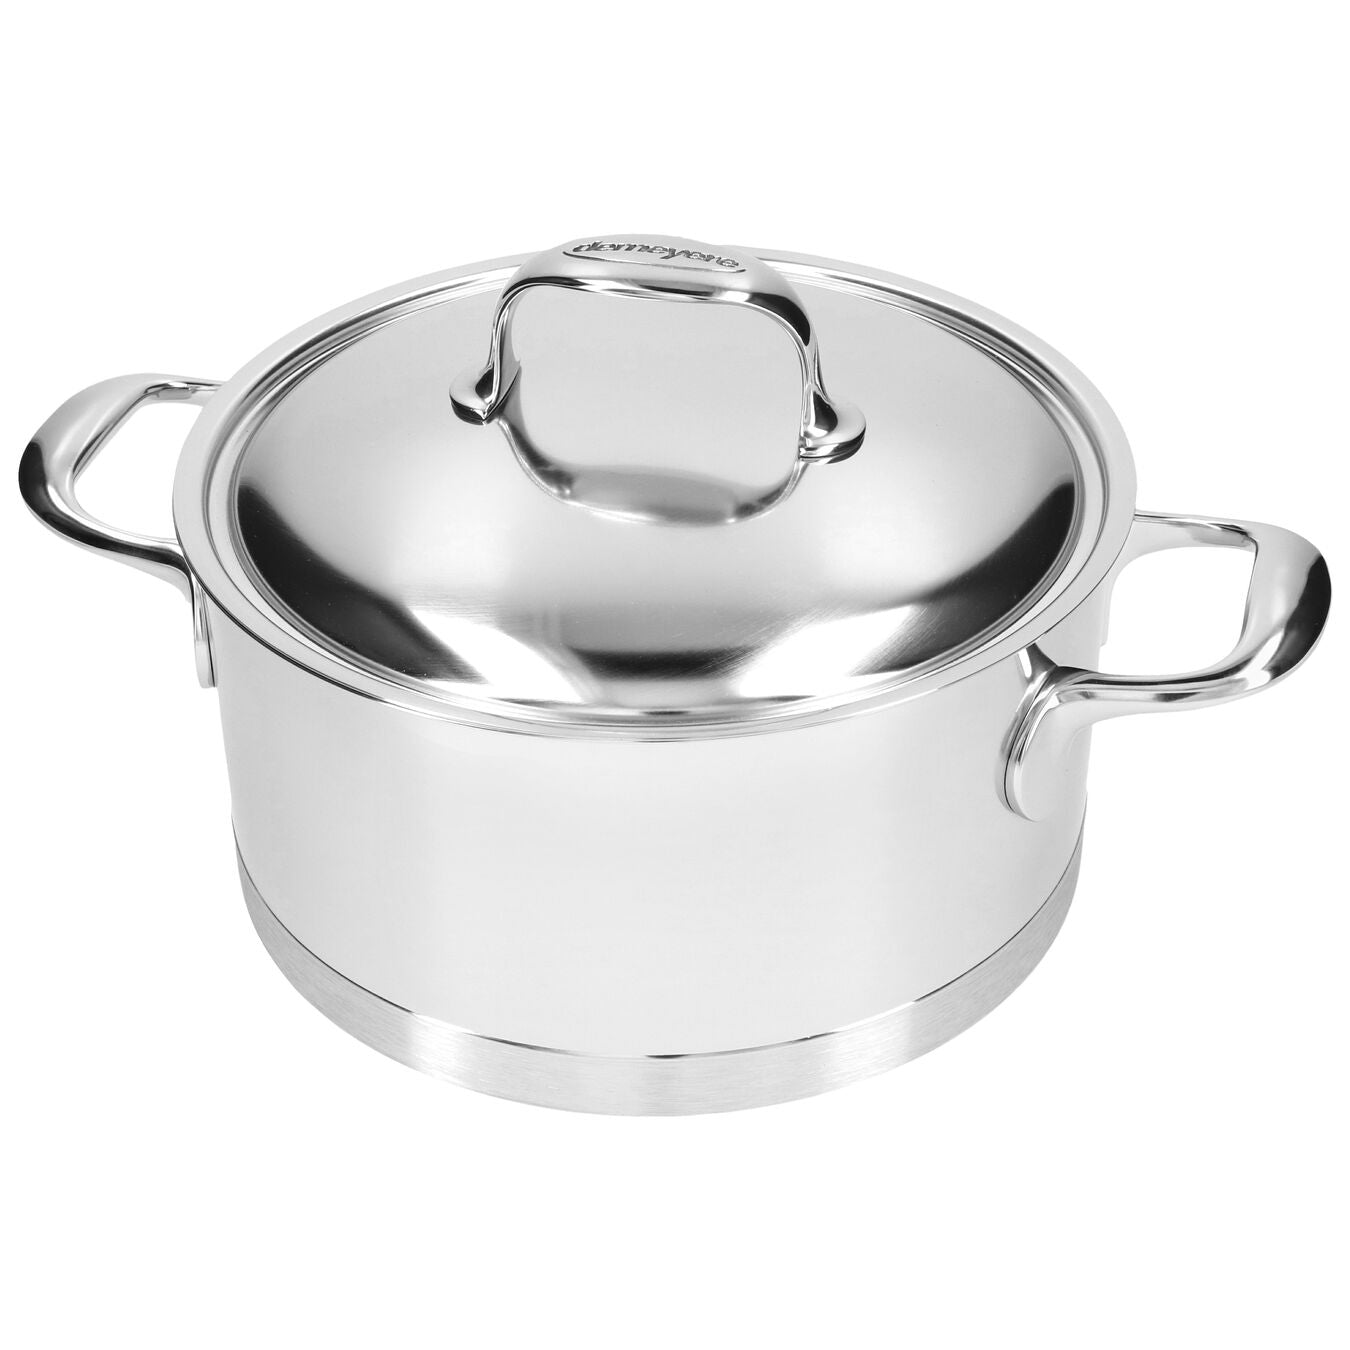 Demeyere Atlantis 7 Collection 3 Piece Set 18/10 Stainless Steel 5.2L/24 cm Saucepot and Fry Pan 24 cm / 9